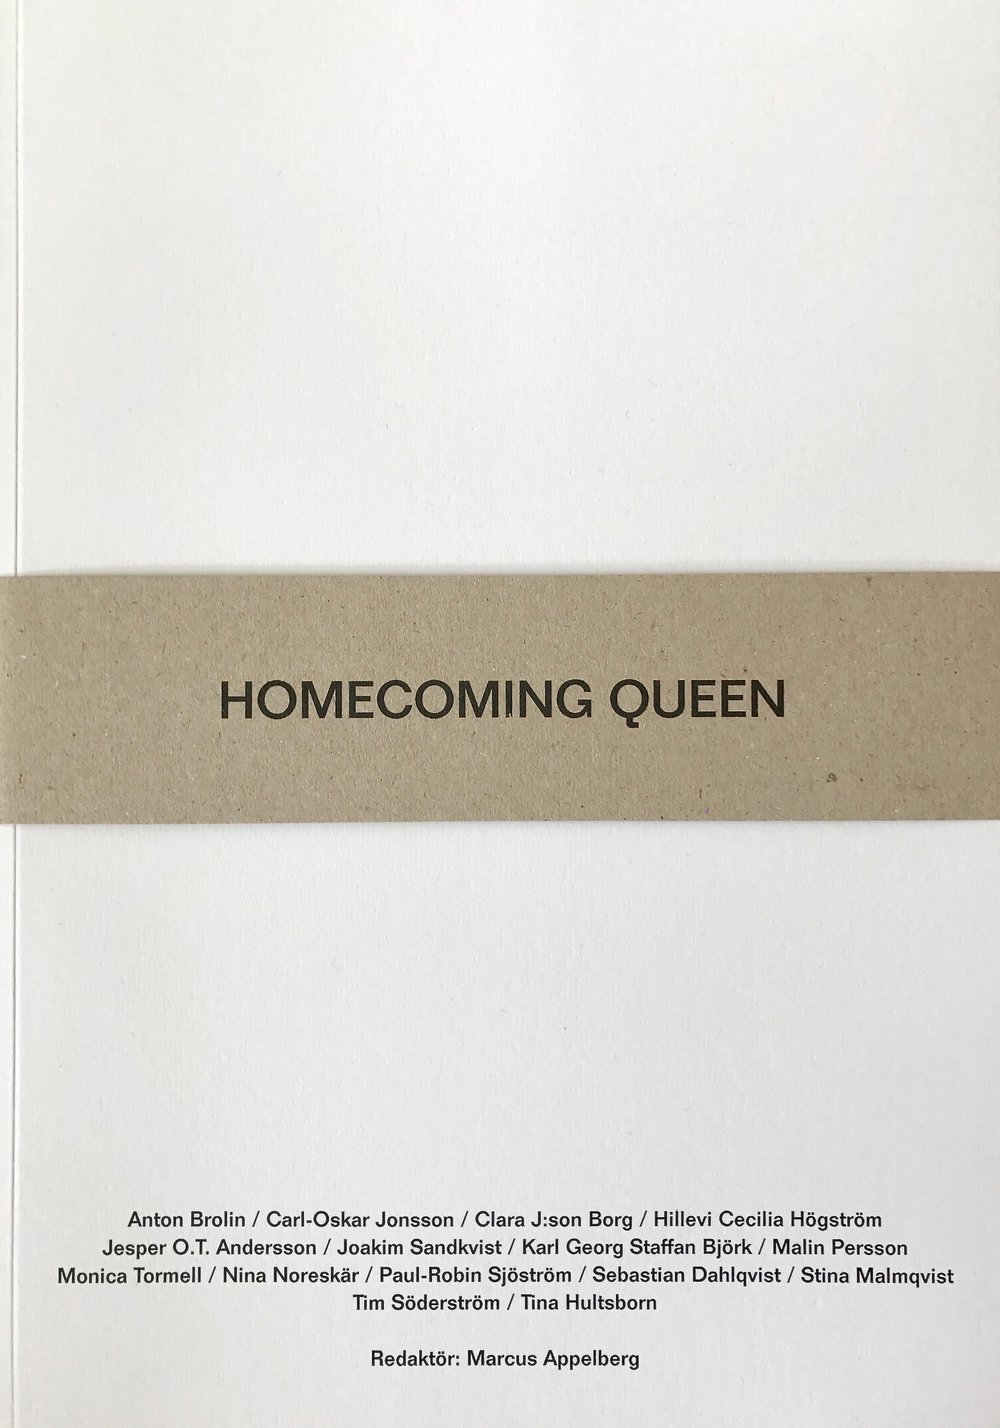 Image of Katalog / Homecoming Queen